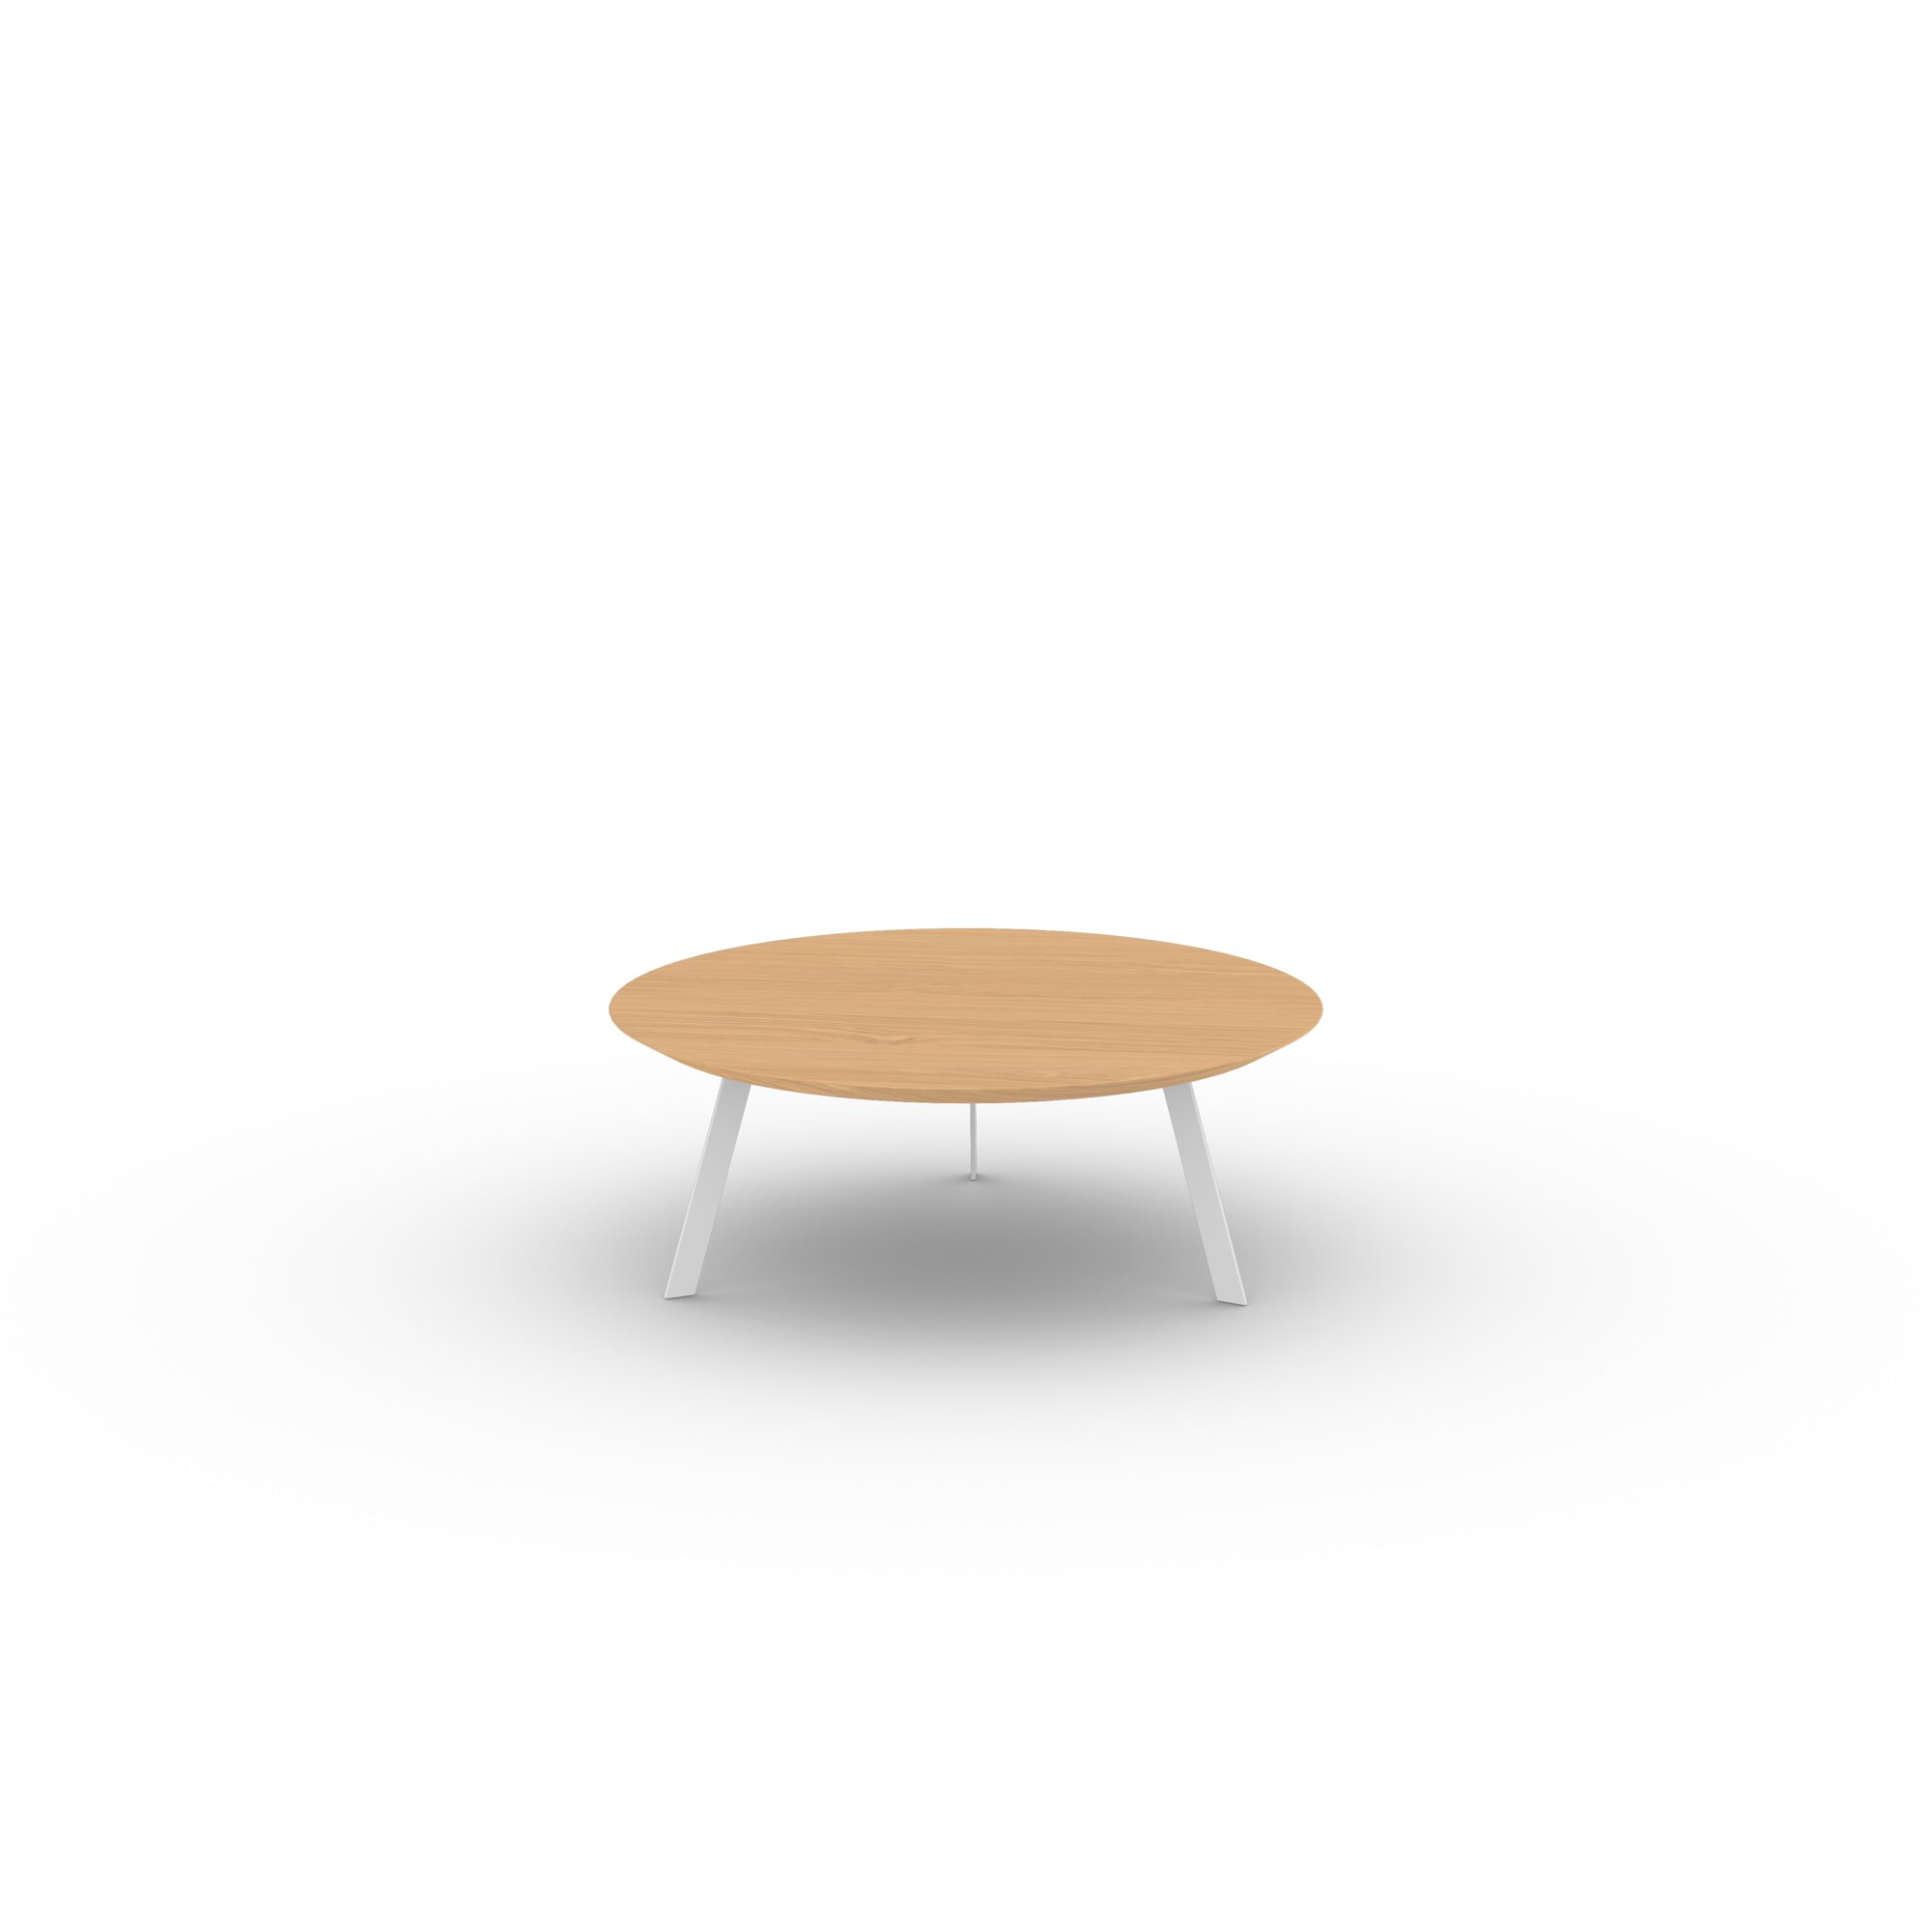 Design Coffee Table | New Co Coffee Table 90 Round White | Oak hardwax oil natural 3062 | Studio HENK| 